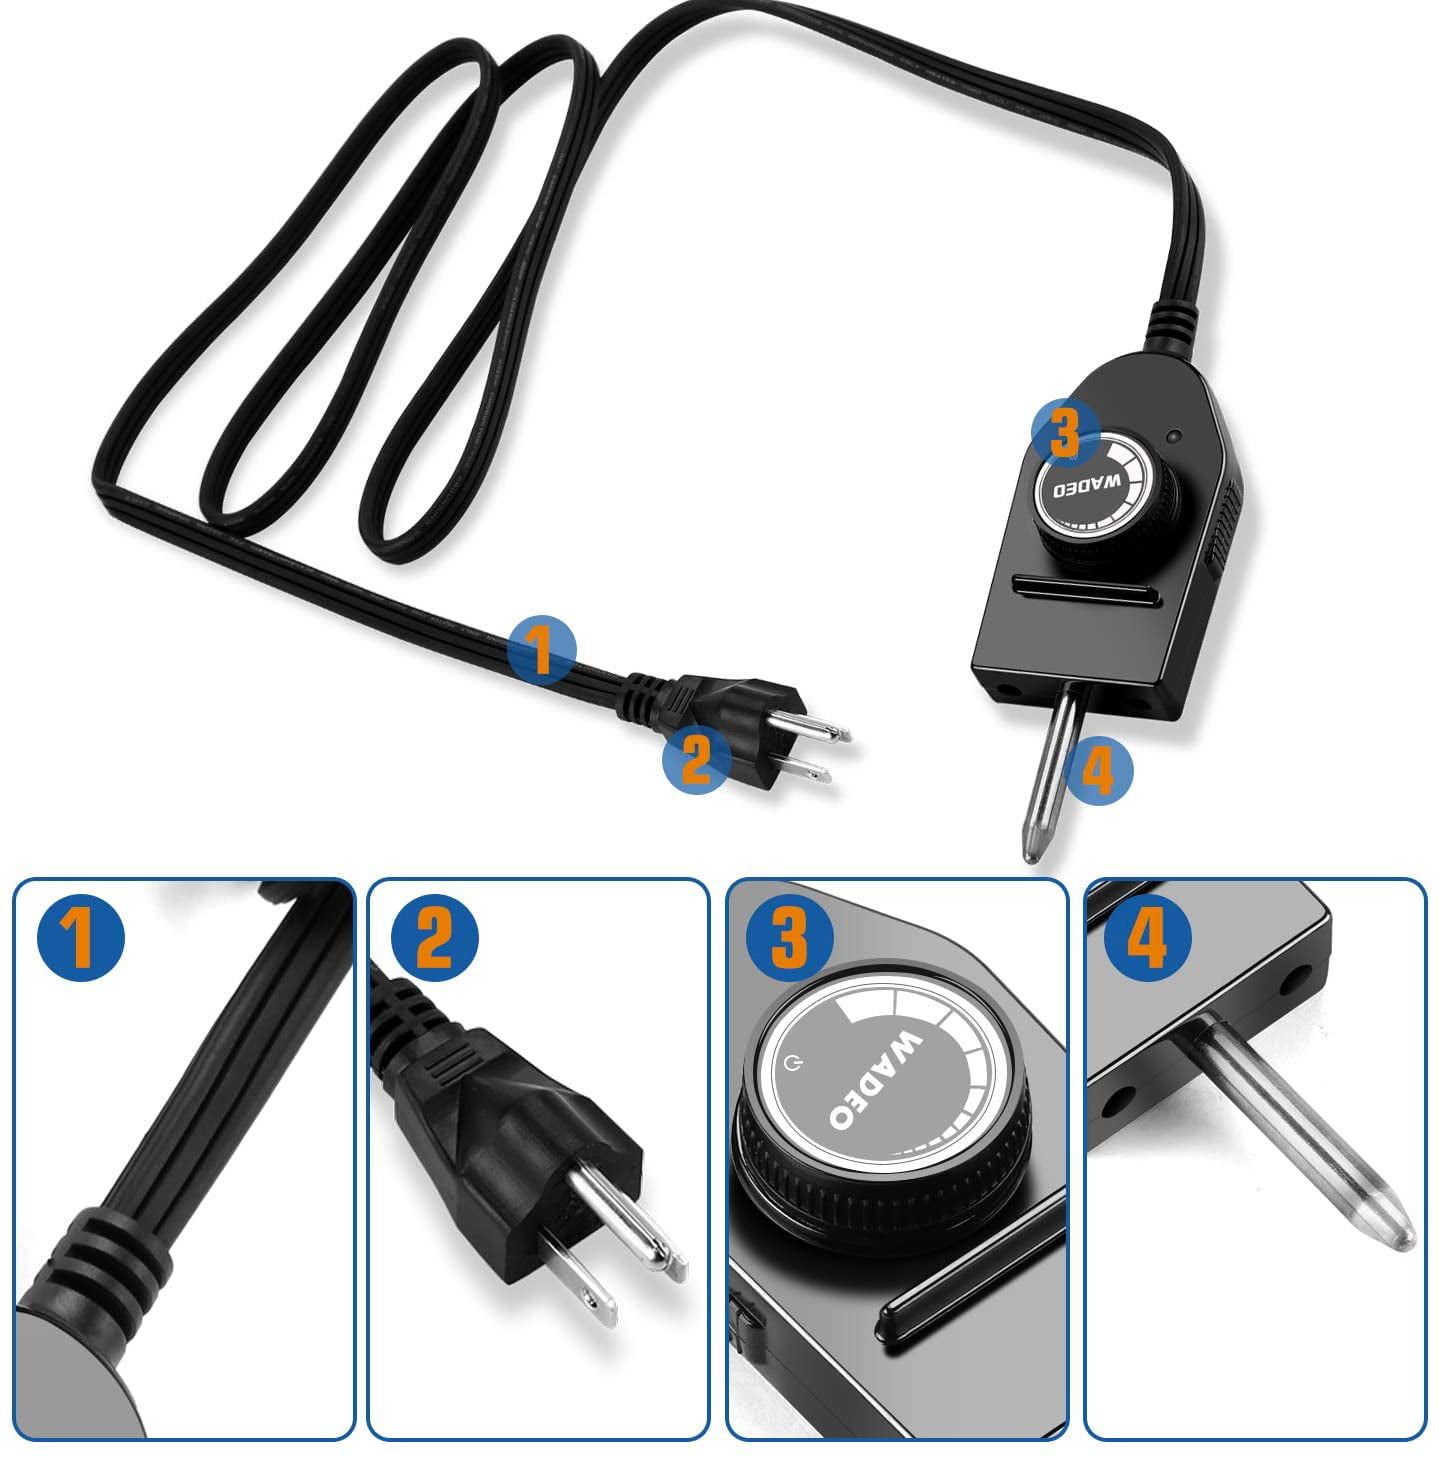 NEW Replacement ELECTRIC SMOKER BBQ GRILL HEATING ELEMENT ADJUSTABLE THERMOSTAT CORD CONTROLLER